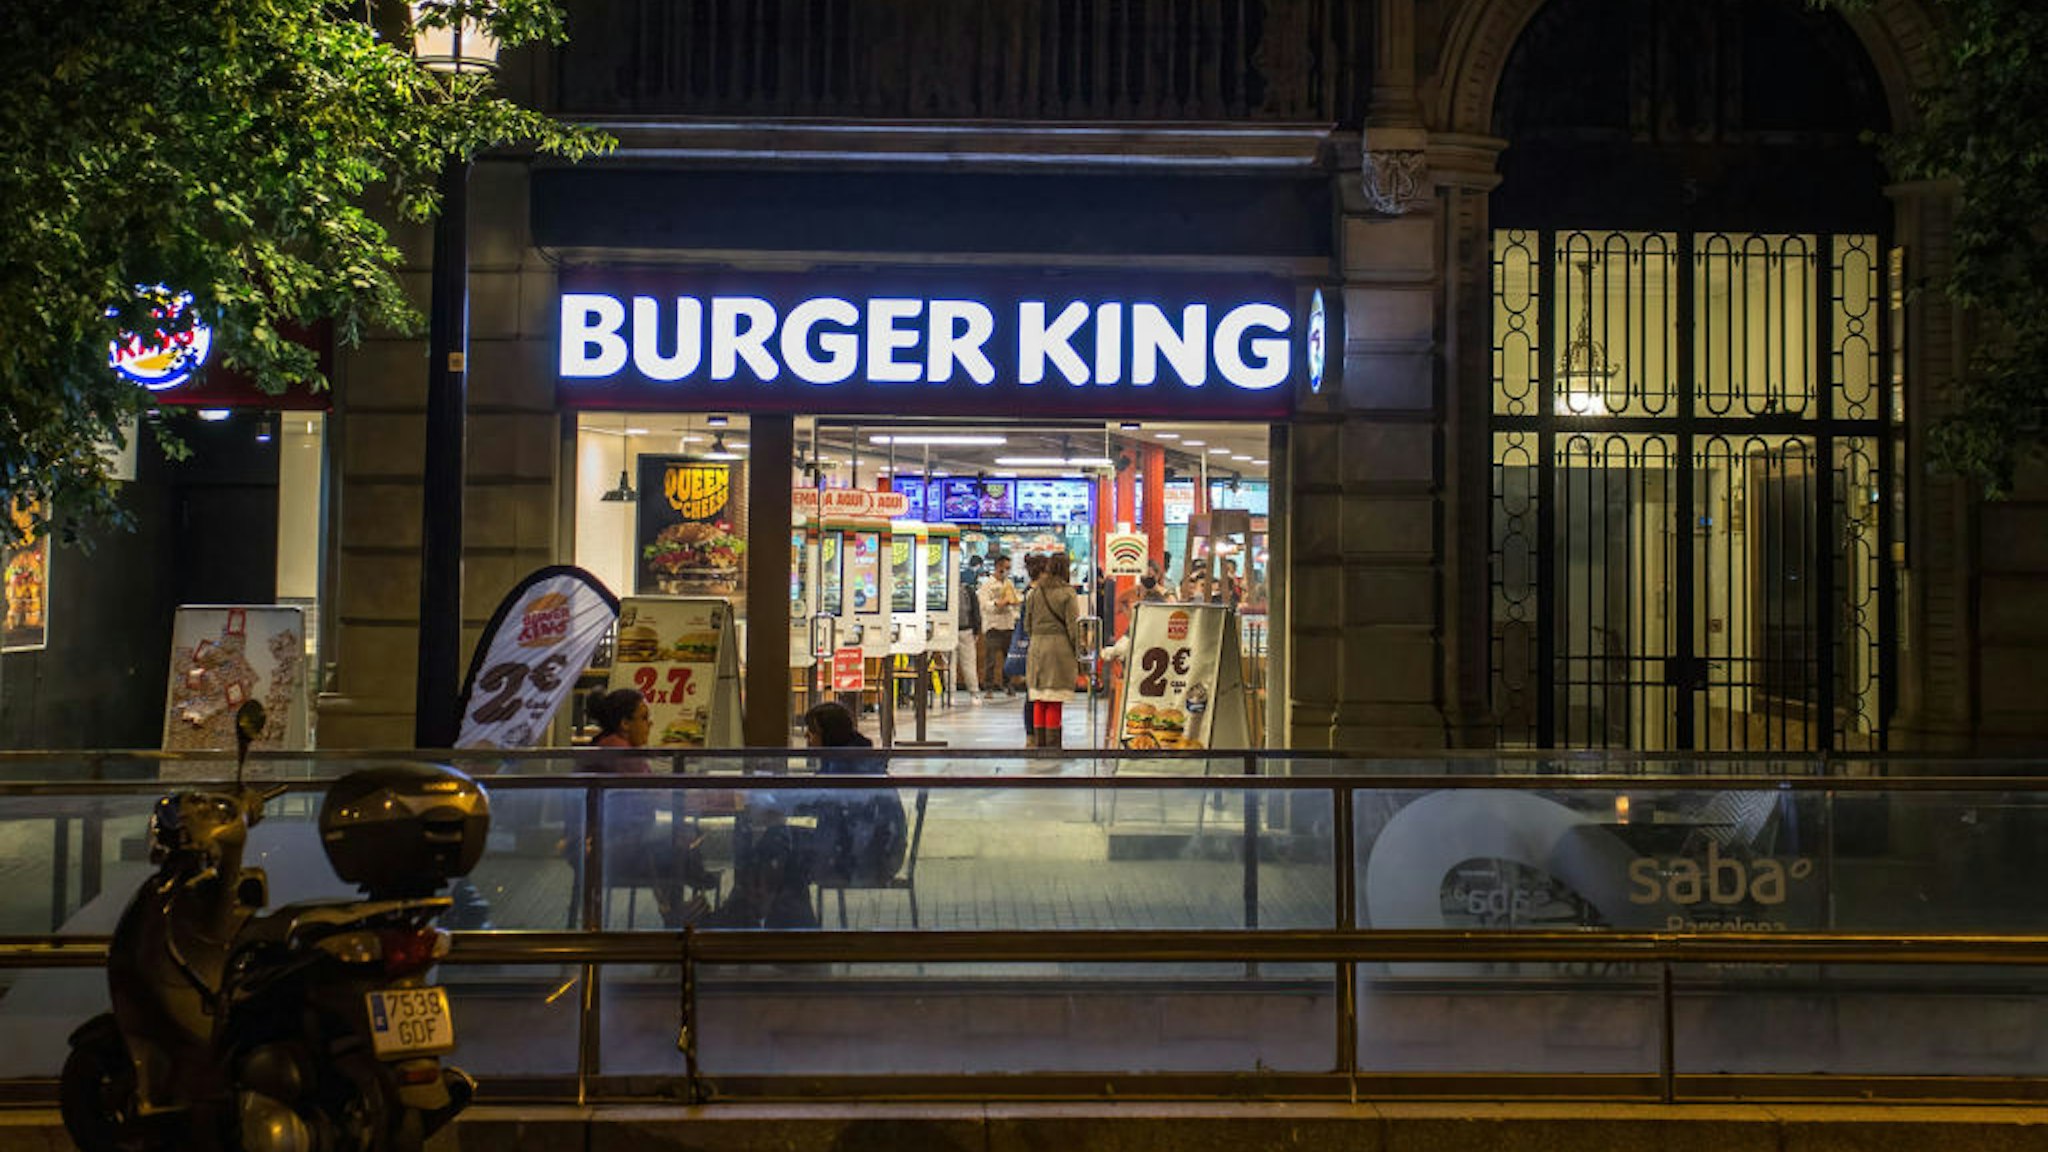 BARCELONA, CATALONIA, SPAIN - 2021/05/09: Burger King restaurant is pictured open at night. Bars and restaurants reopen at night in Barcelona, after the end of the curfew, which begun in Catalonia on October 25, 2020 until May 9, 2021.